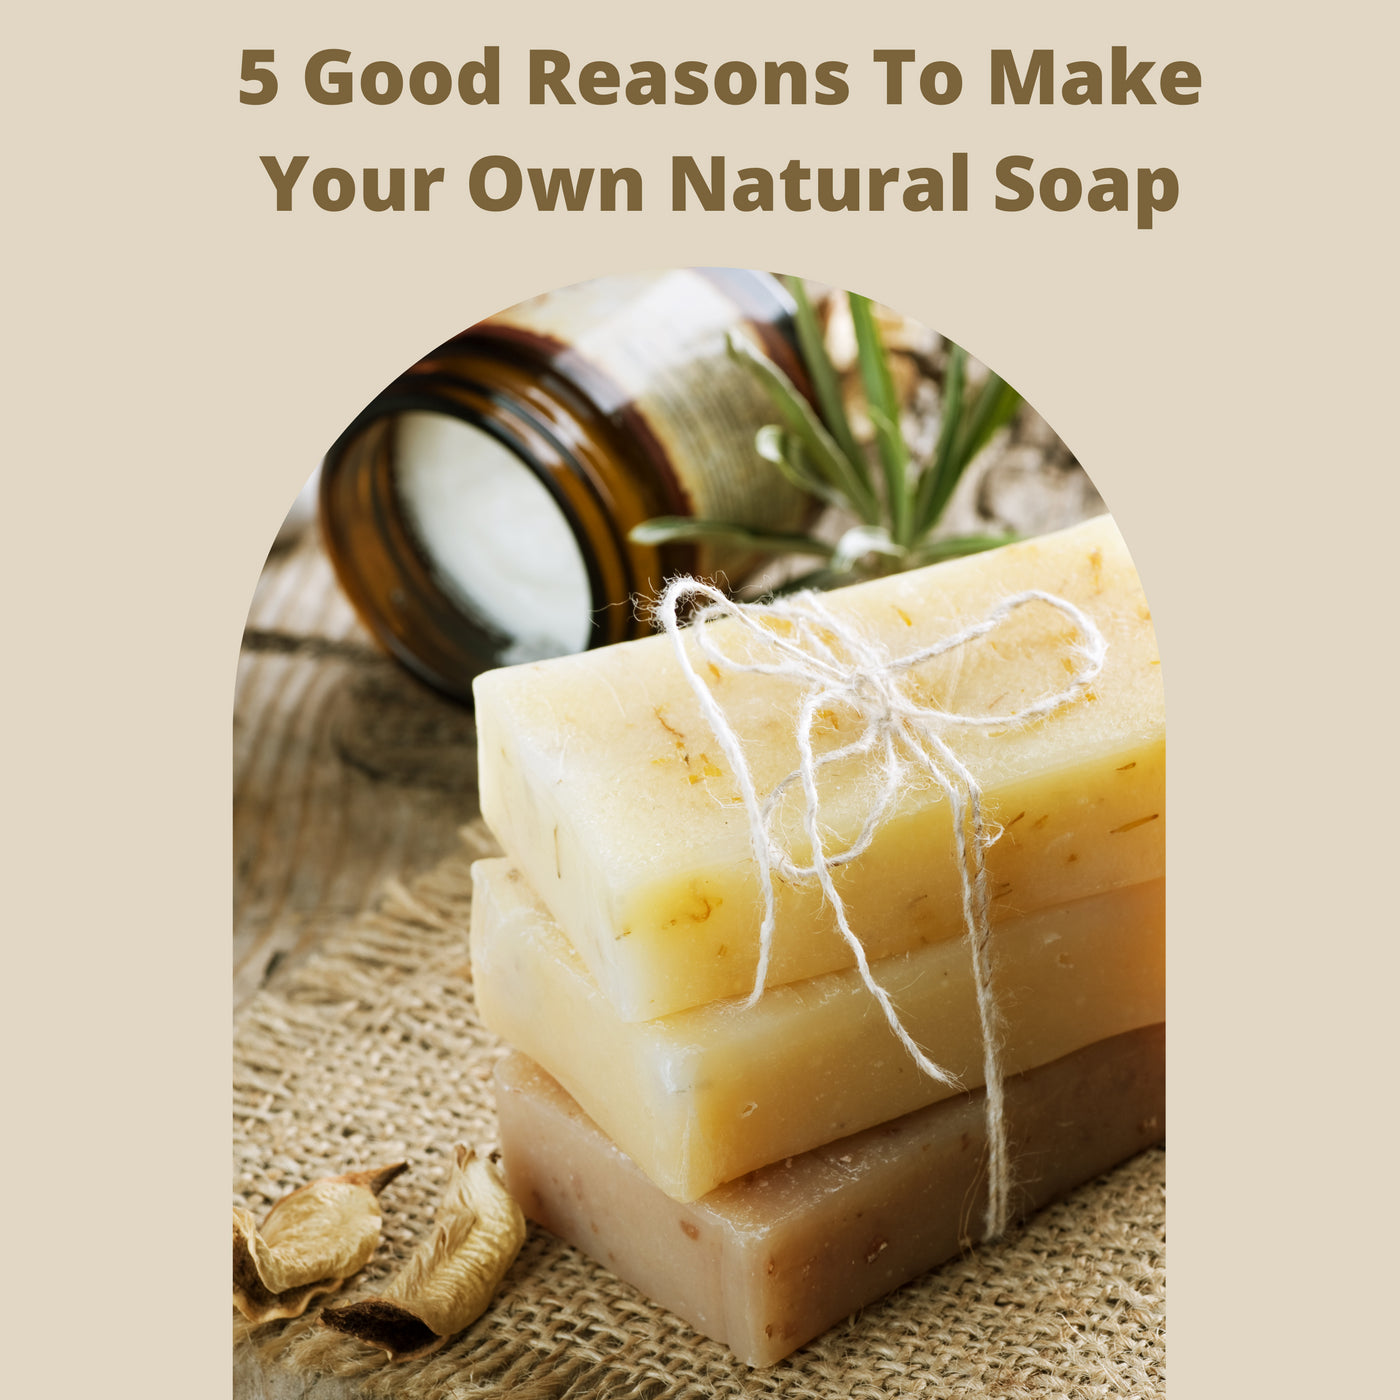 5 good reasons to make your own natural soap - The Soap Coach